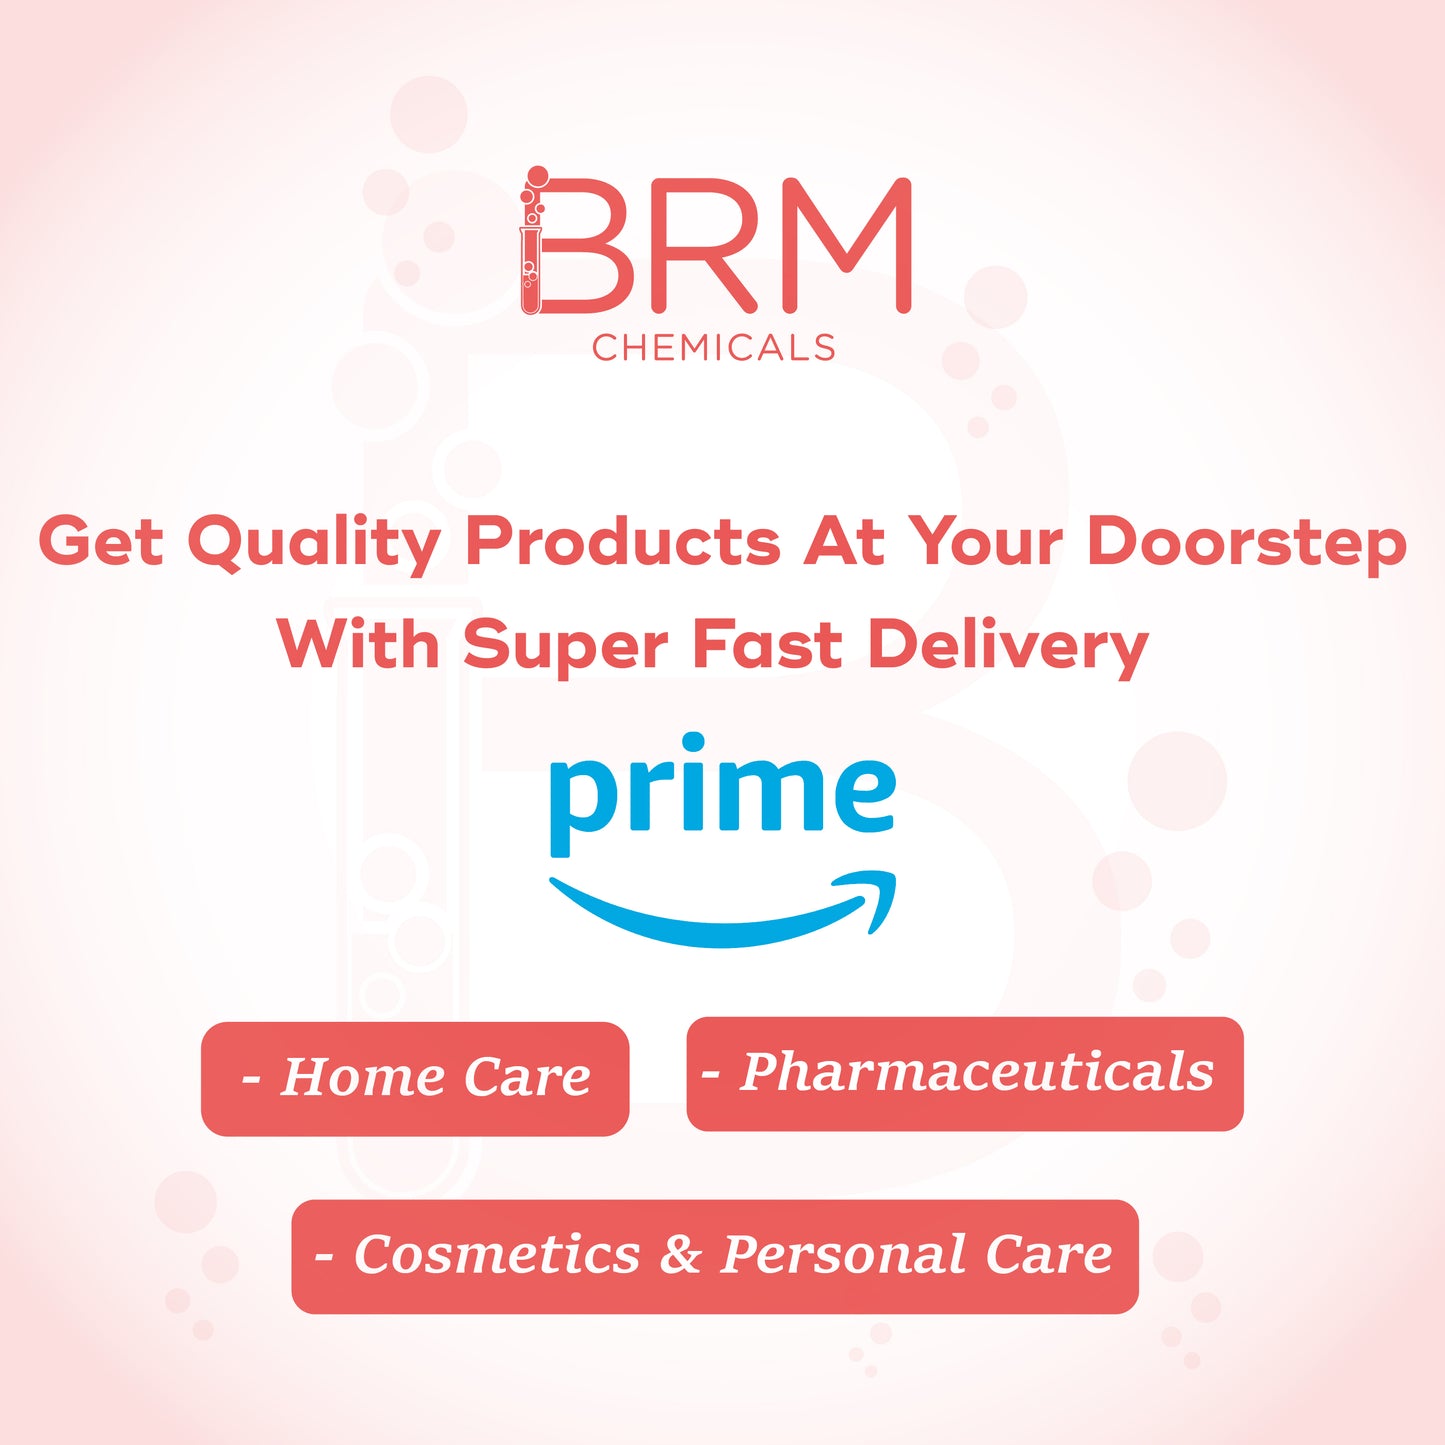 BRM chemicals' poster for fast delivery to doorstep